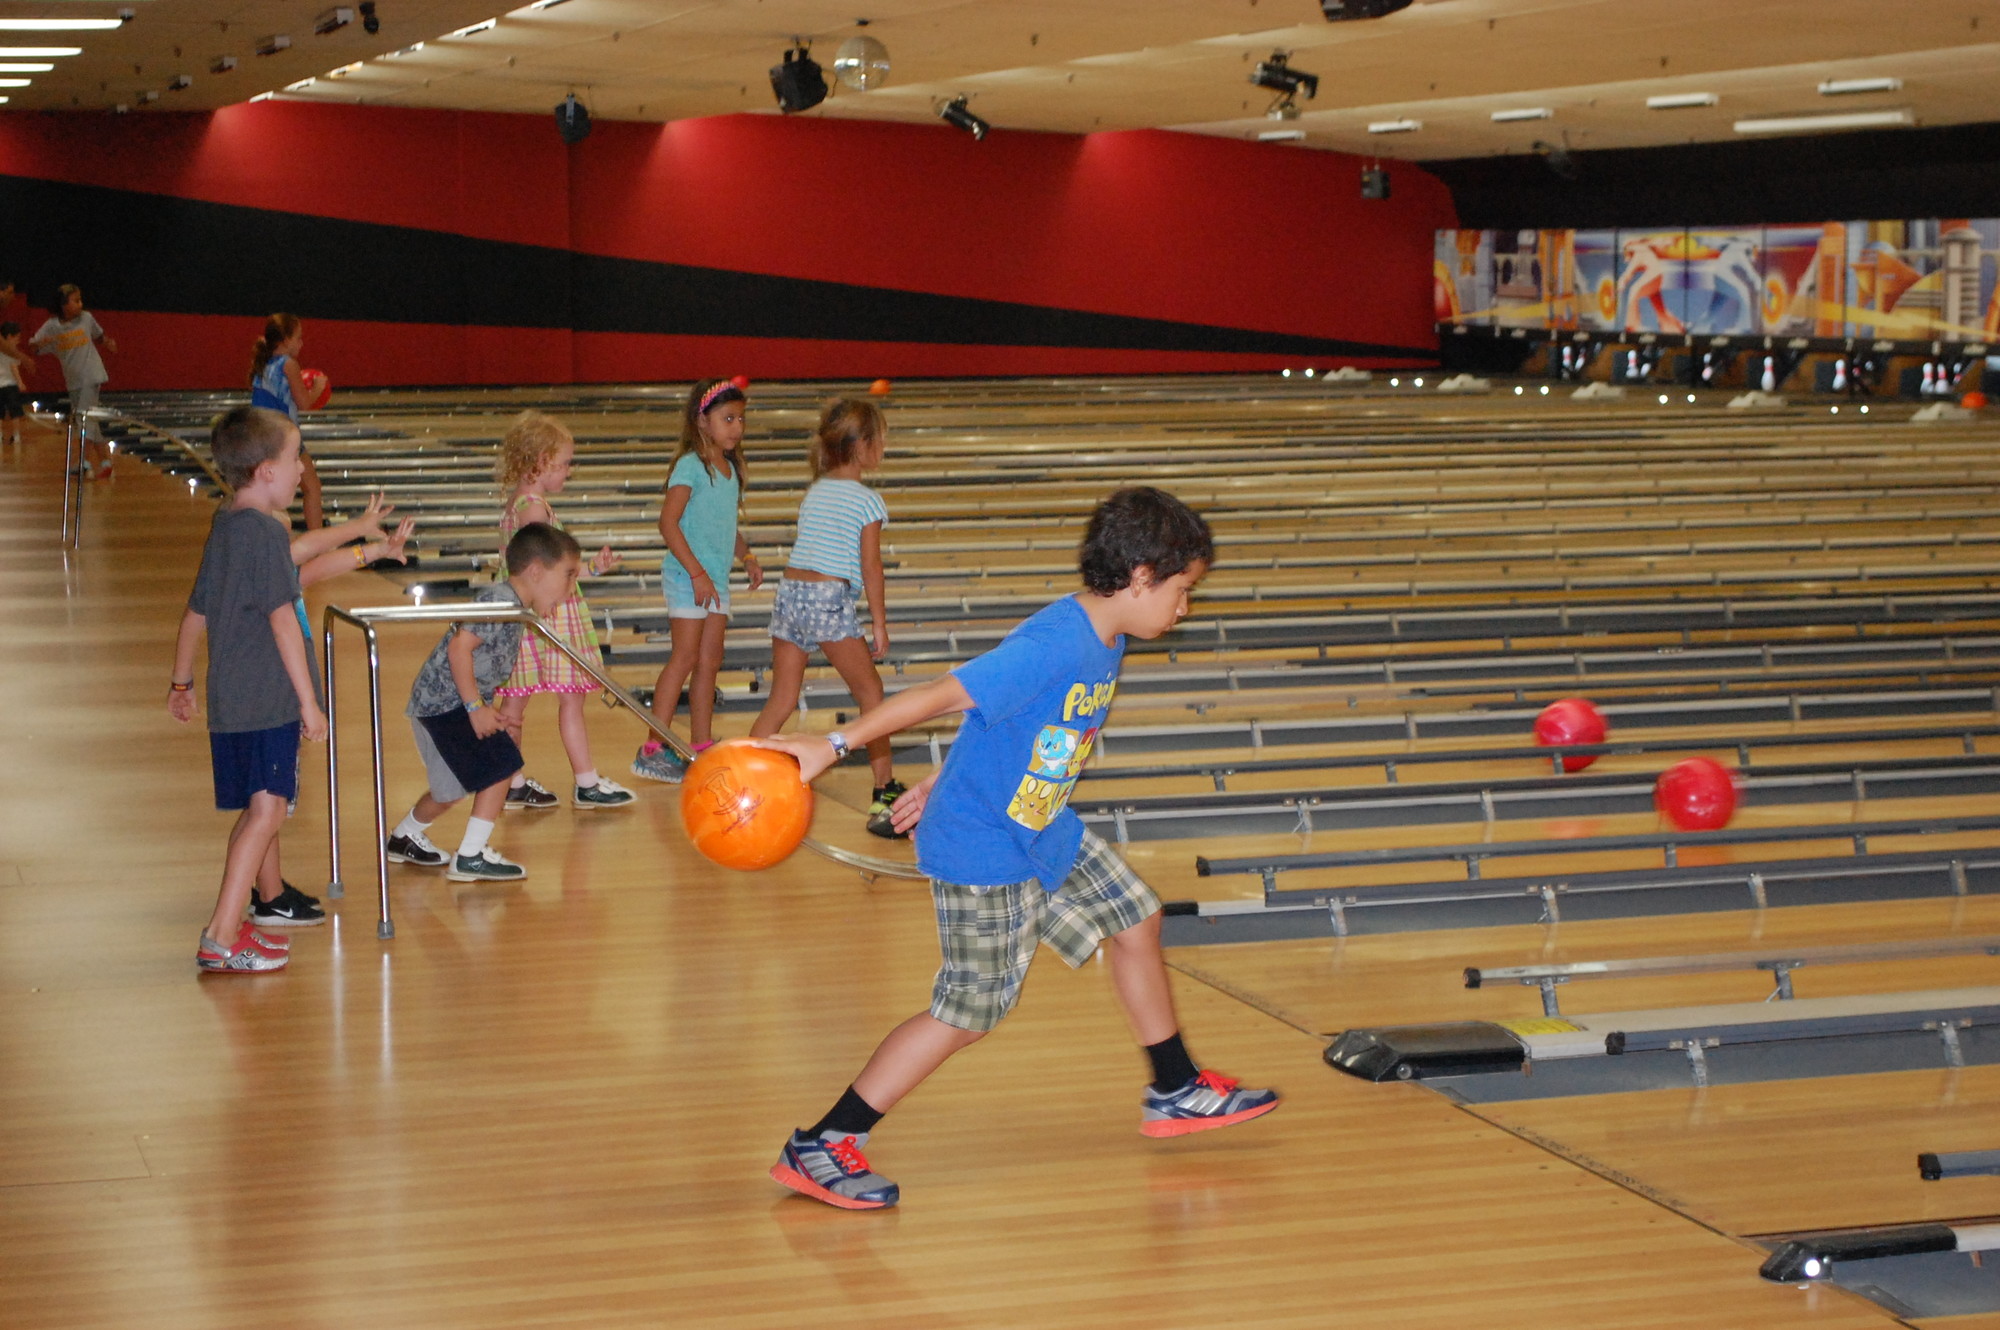 children were invited to a bowling party at AMF Wantagh Lanes on Aug. 21 as a reward for completing the summer reading program requirements at the Wantagh Public Library.